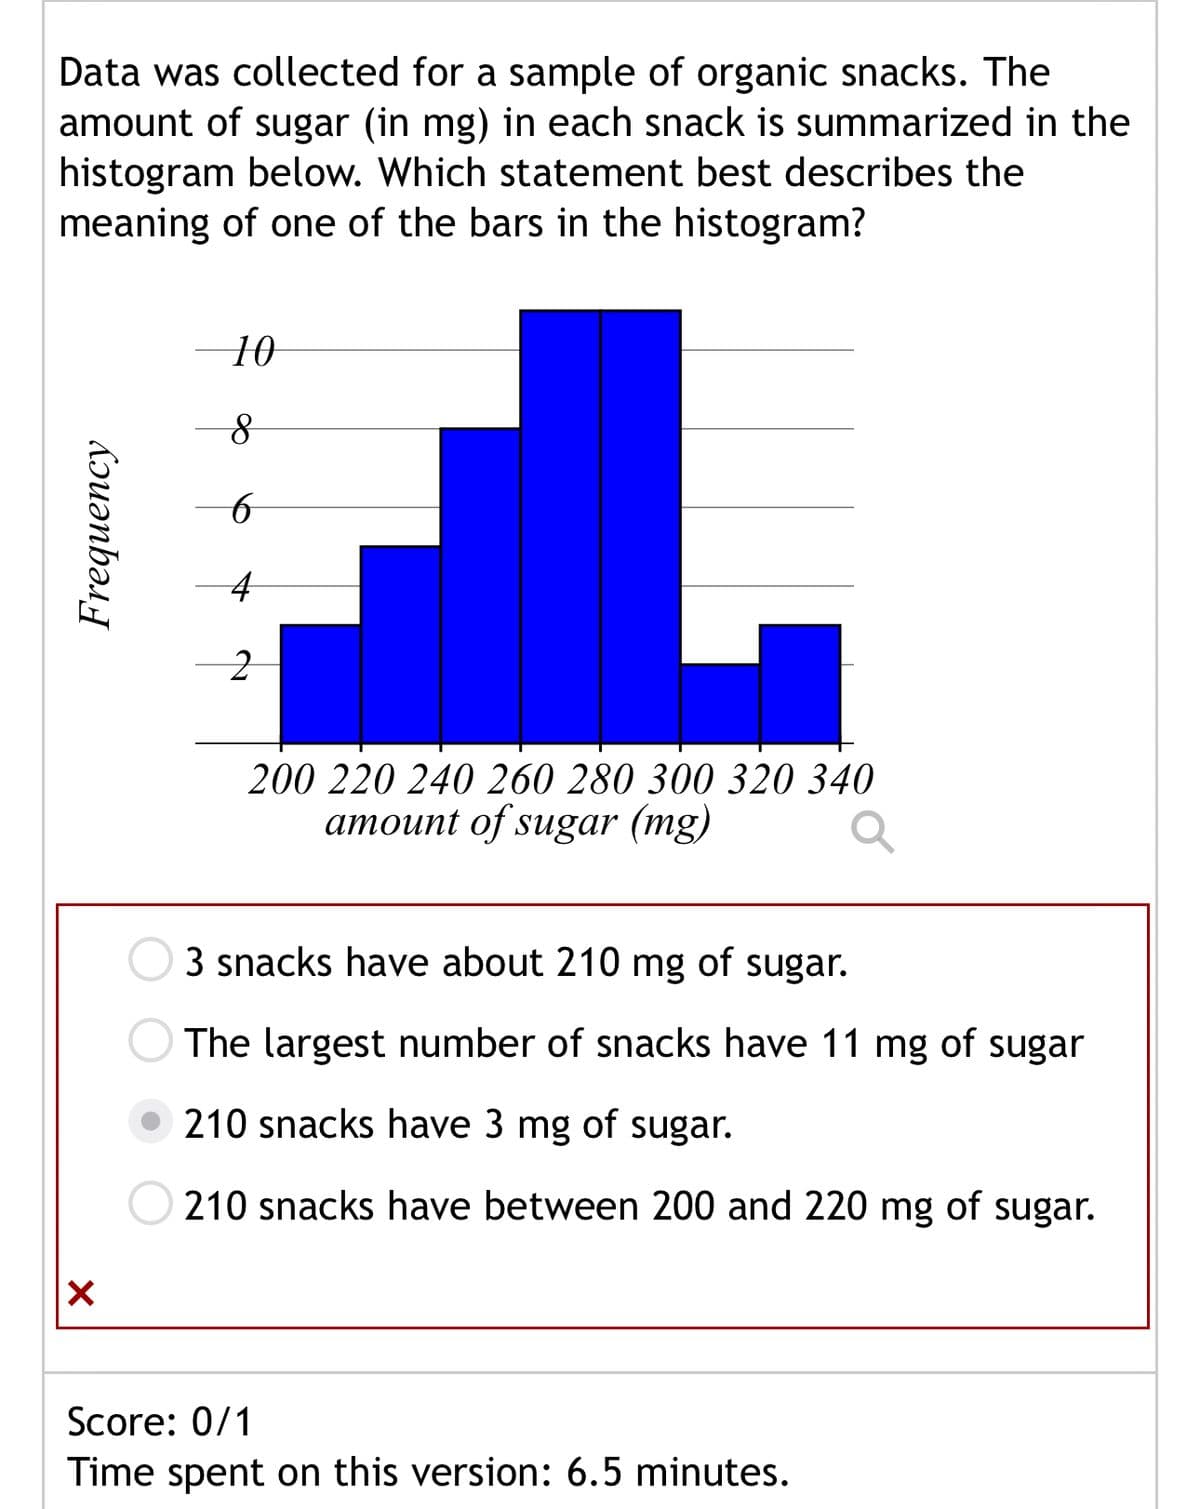 Data was collected for a sample of organic snacks. The
amount of sugar (in mg) in each snack is summarized in the
histogram below. Which statement best describes the
meaning of one of the bars in the histogram?
Frequency
10
8
6
4
2
✓
200 220 240 260 280 300 320 340
amount of sugar (mg)
3 snacks have about 210 mg of sugar.
The largest number of snacks have 11 mg of sugar
210 snacks have 3 mg of sugar.
210 snacks have between 200 and 220 mg of sugar.
Score: 0/1
Time spent on this version: 6.5 minutes.